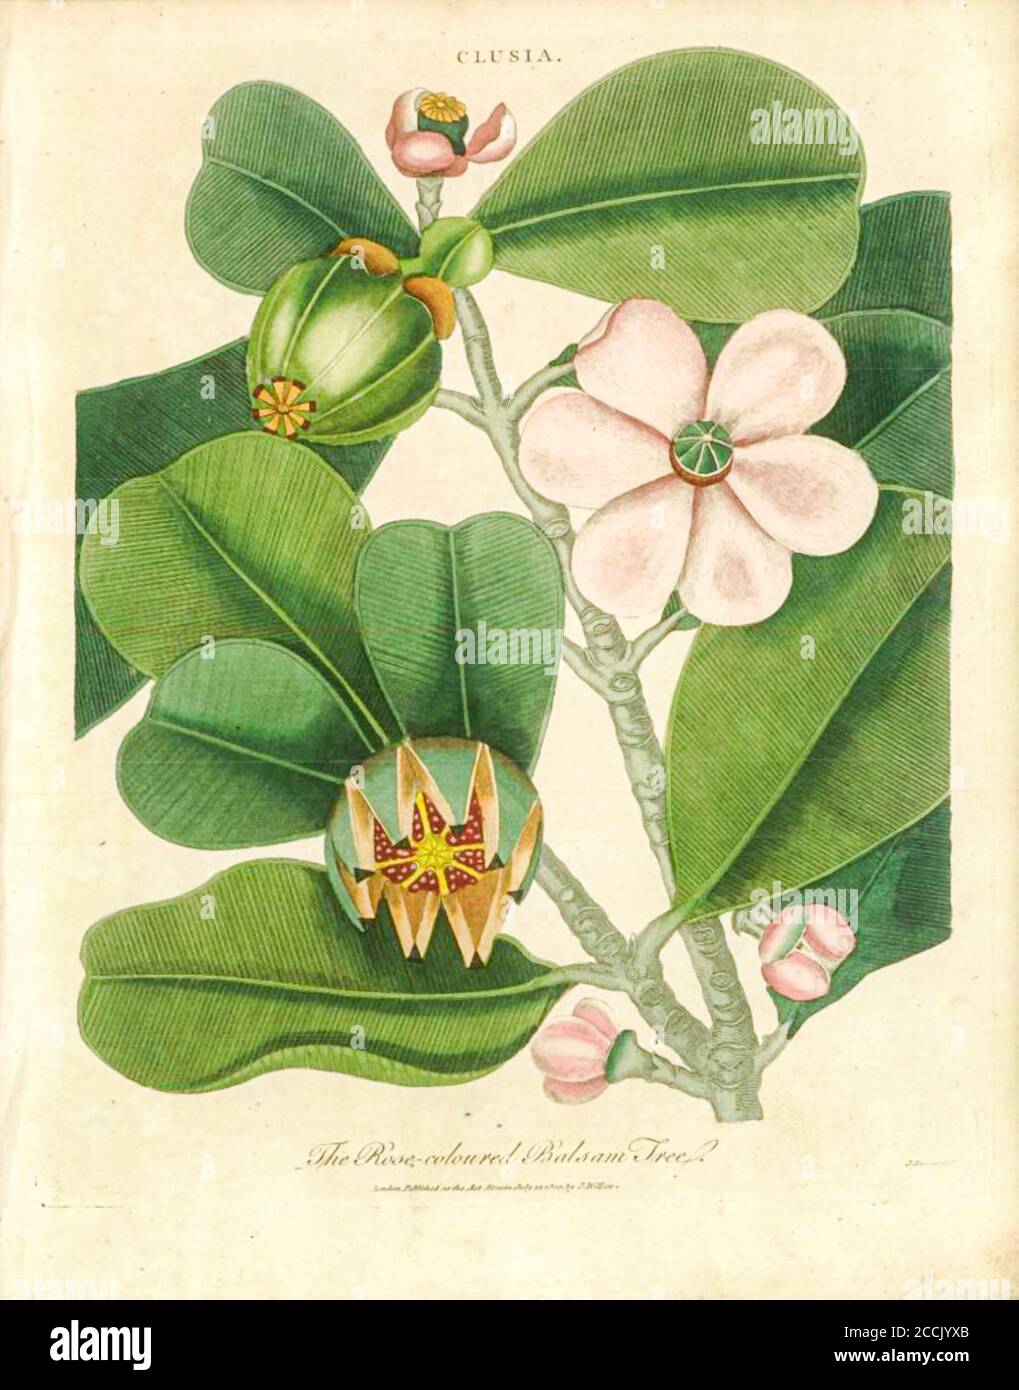 Clusia The Rose Coloured Balsam Tree which produces spices and perfumes Handcolored copperplate engraving From the Encyclopaedia Londinensis or, Universal dictionary of arts, sciences, and literature; Volume IV;  Edited by Wilkes, John. Published in London in 1810 Stock Photo